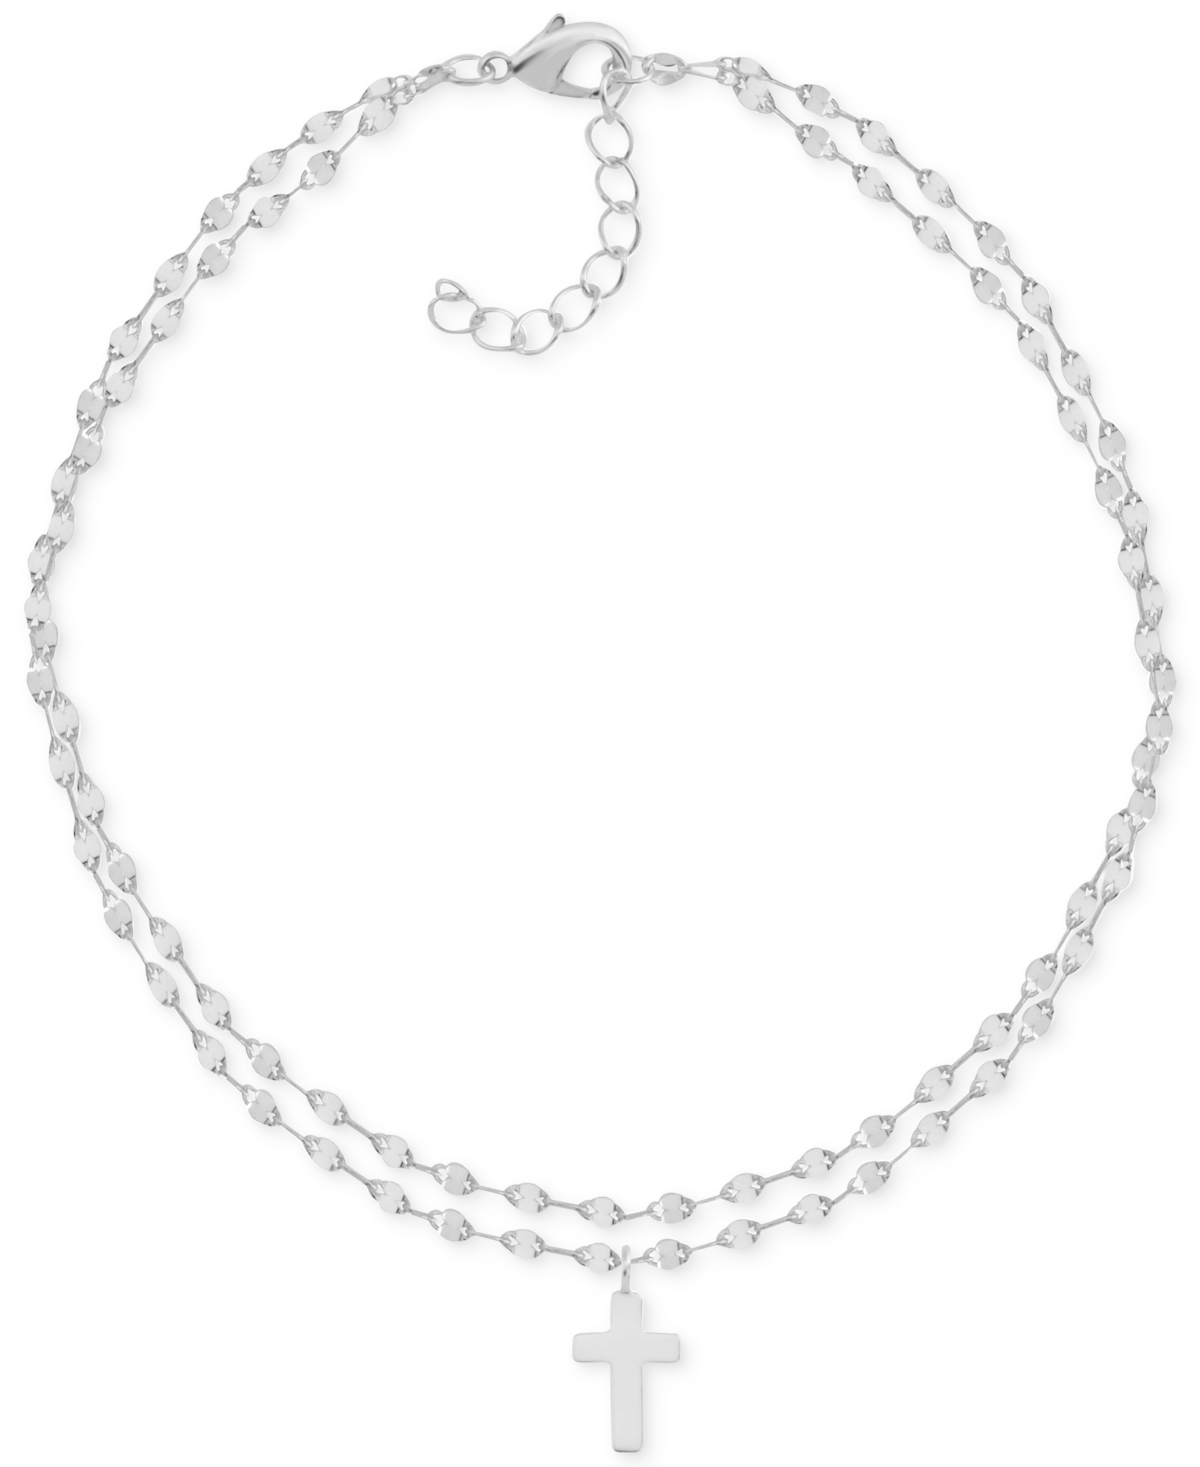 Two-Row Mirror Chain Cross Silver Plate Anklet - Silver